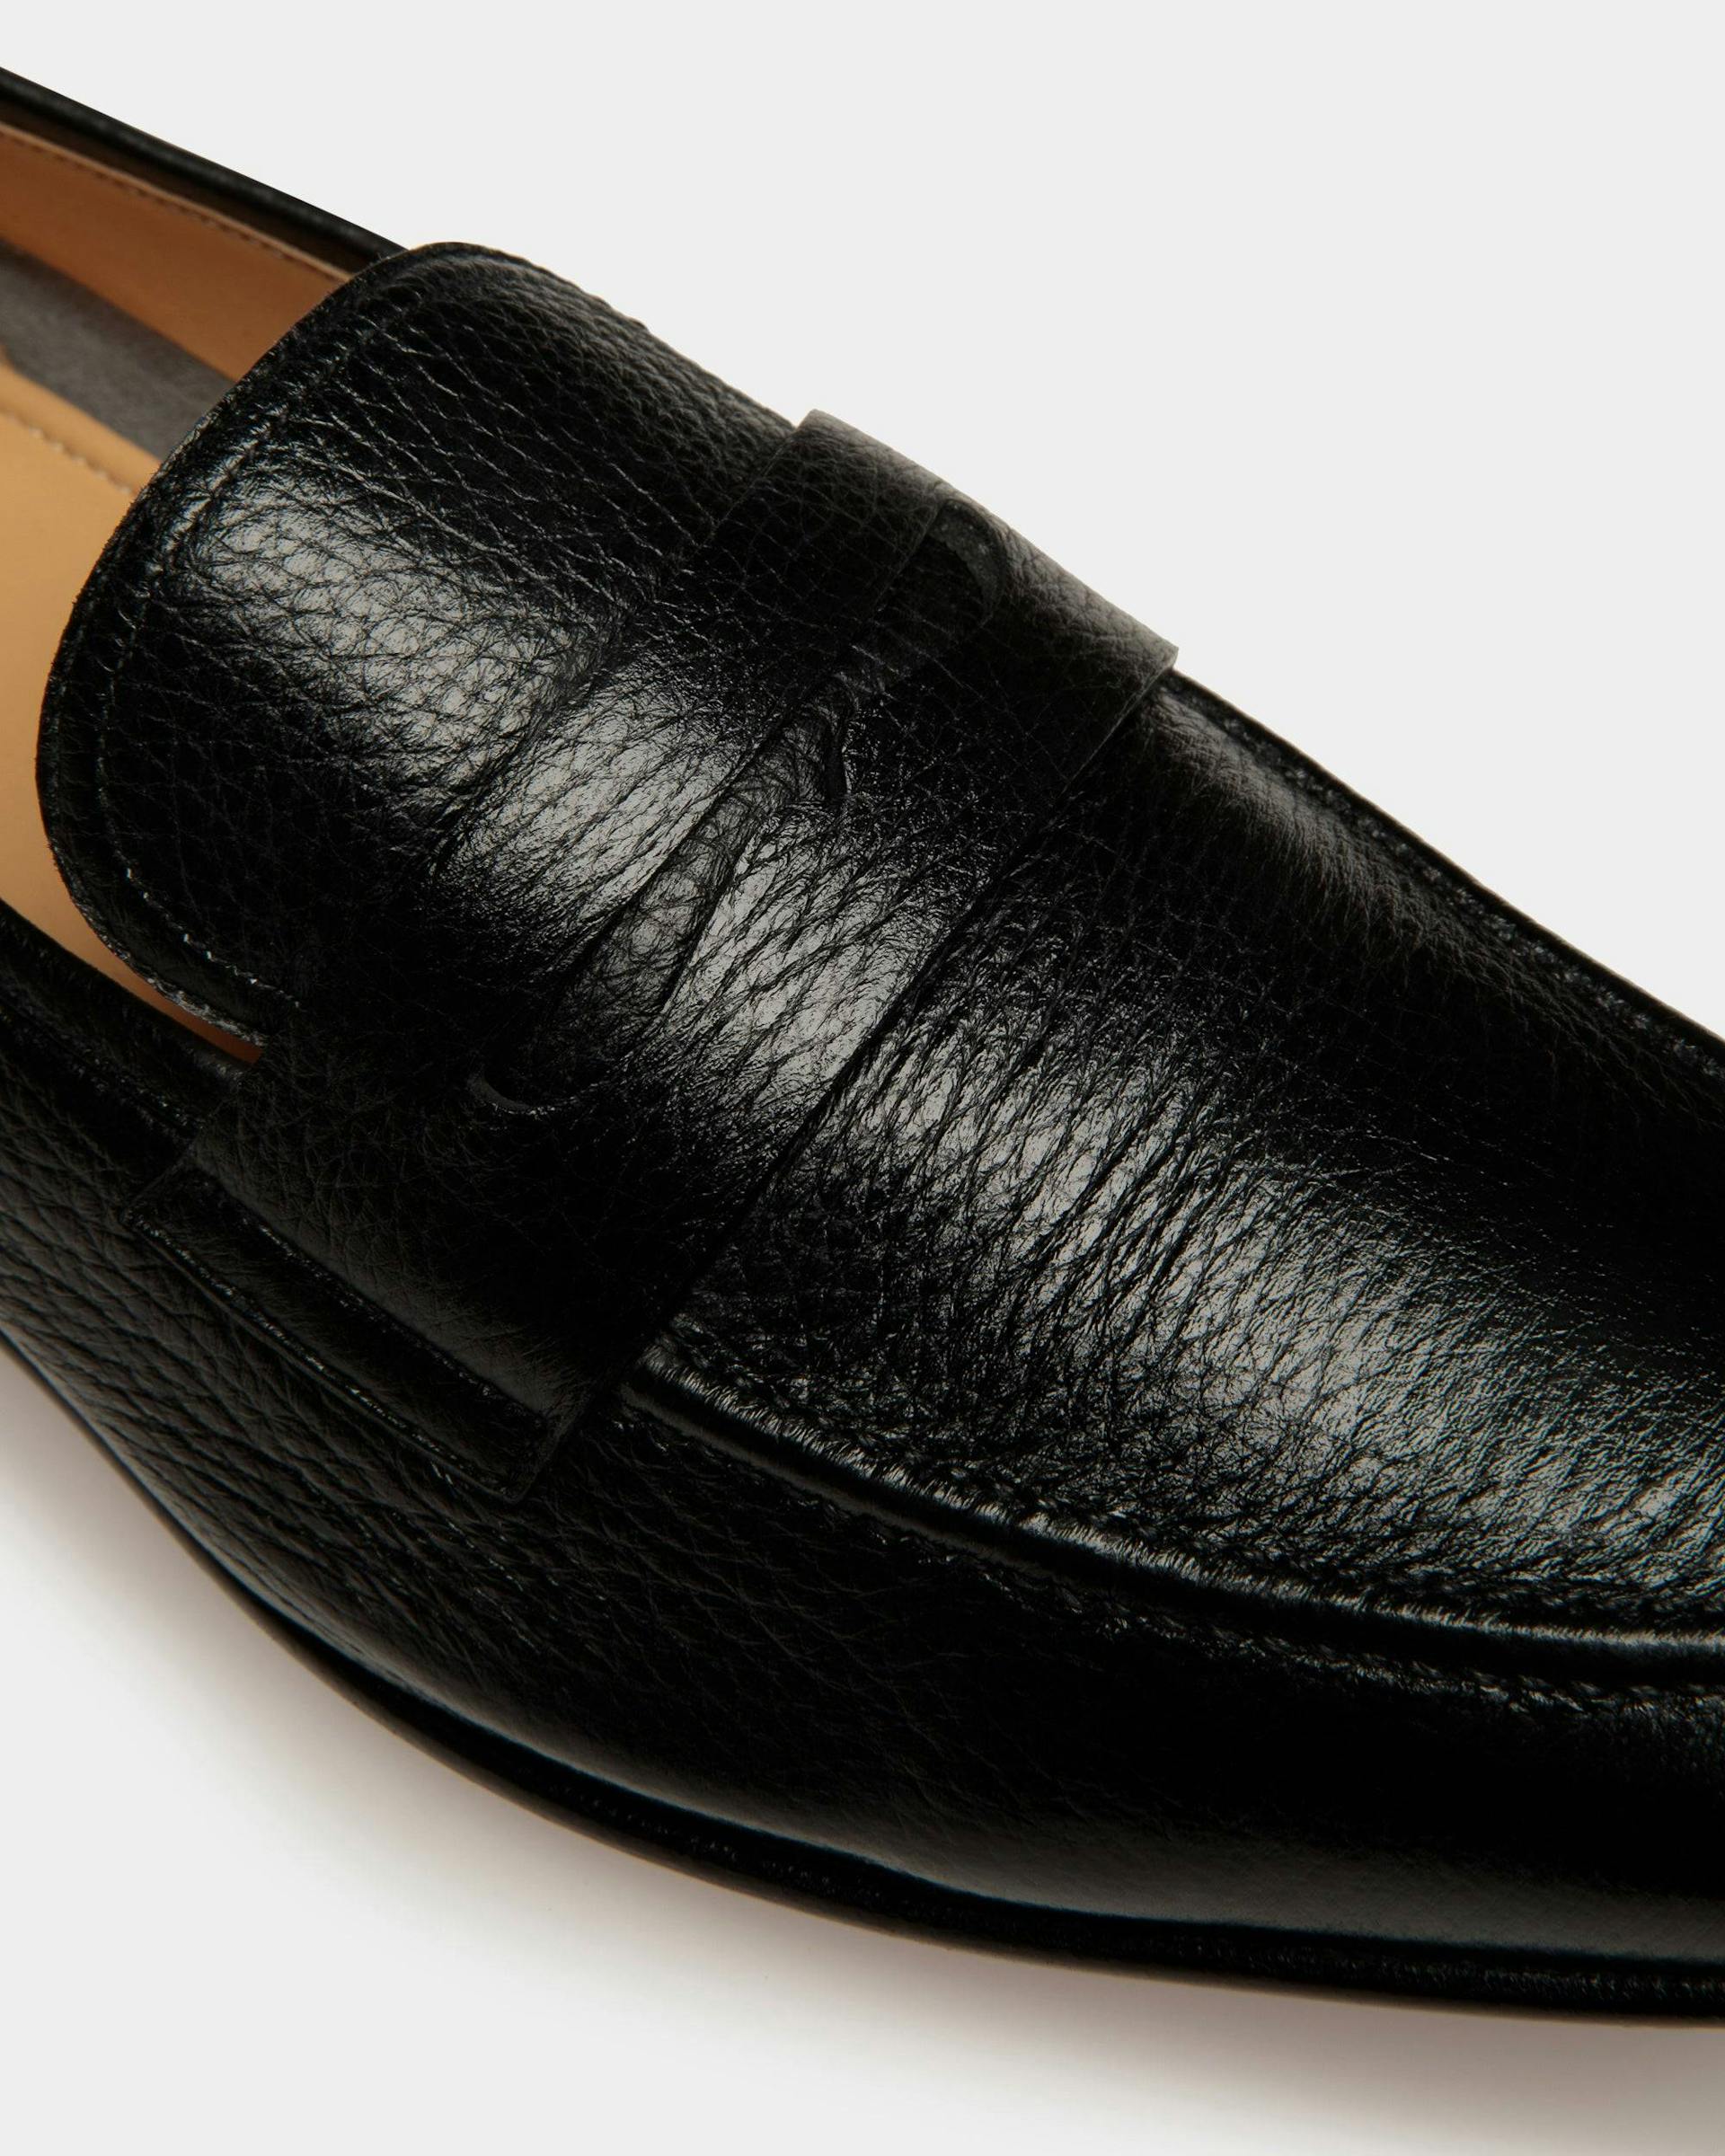 Men's Suisse Loafers In Black Leather | Bally | Still Life Detail